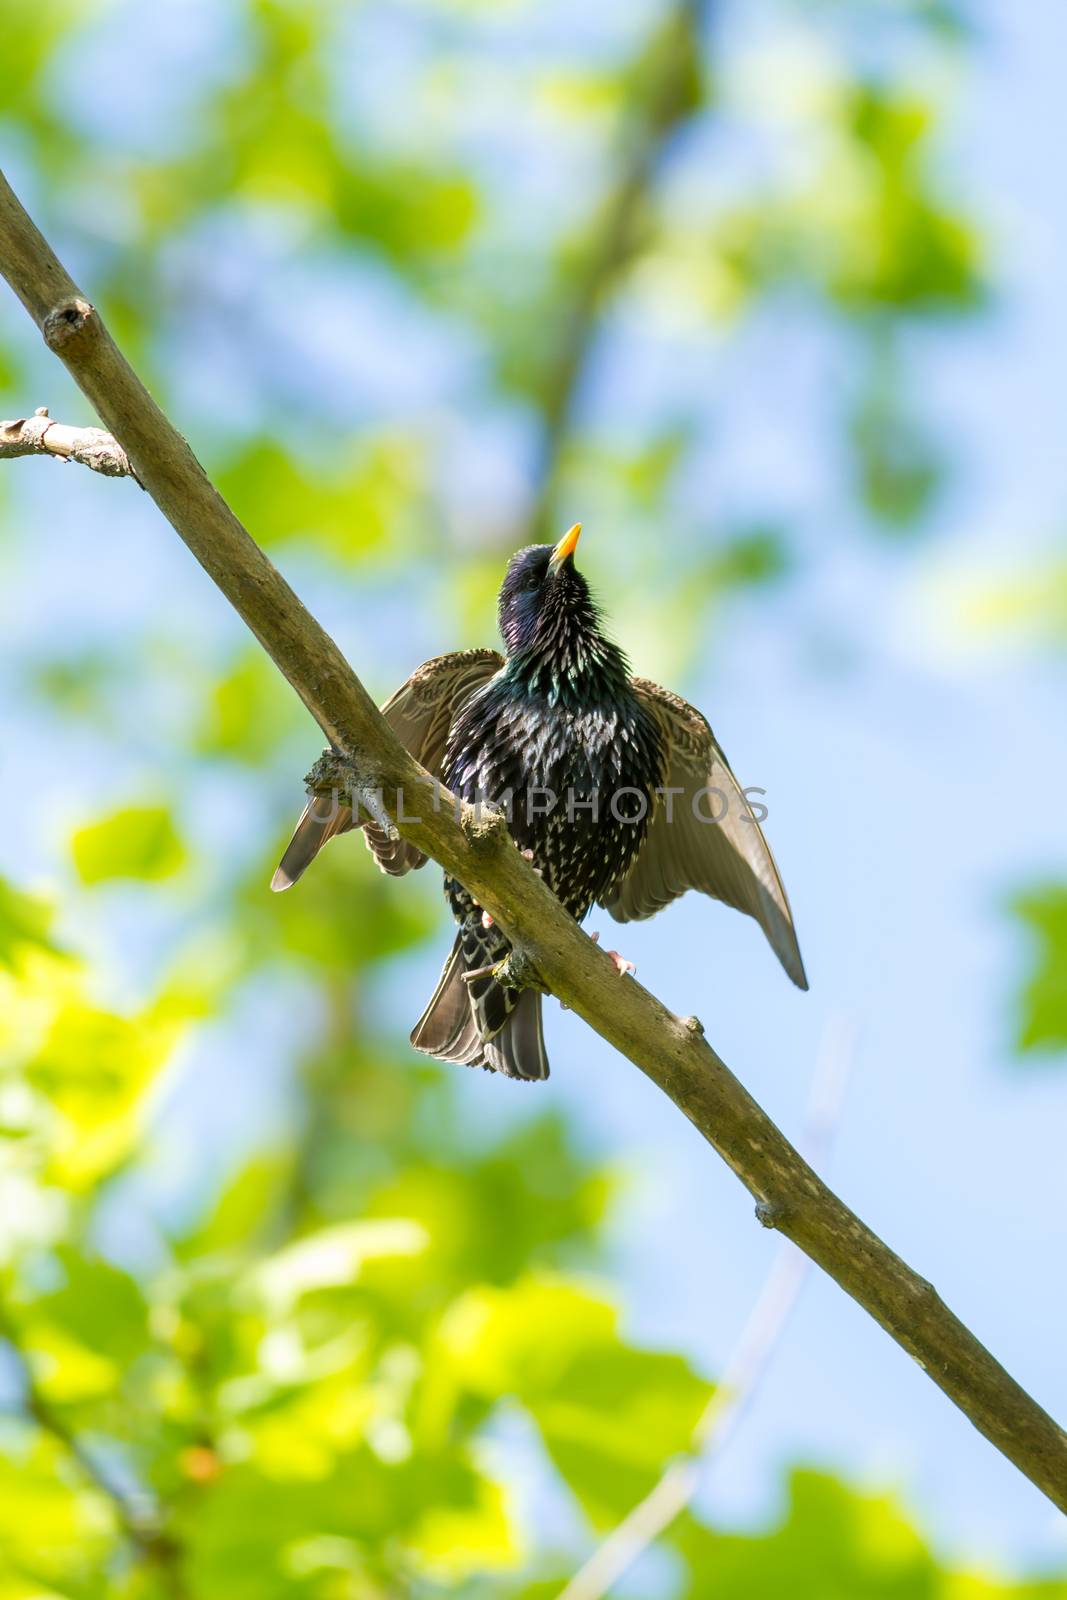 European starling on the branch by Digoarpi